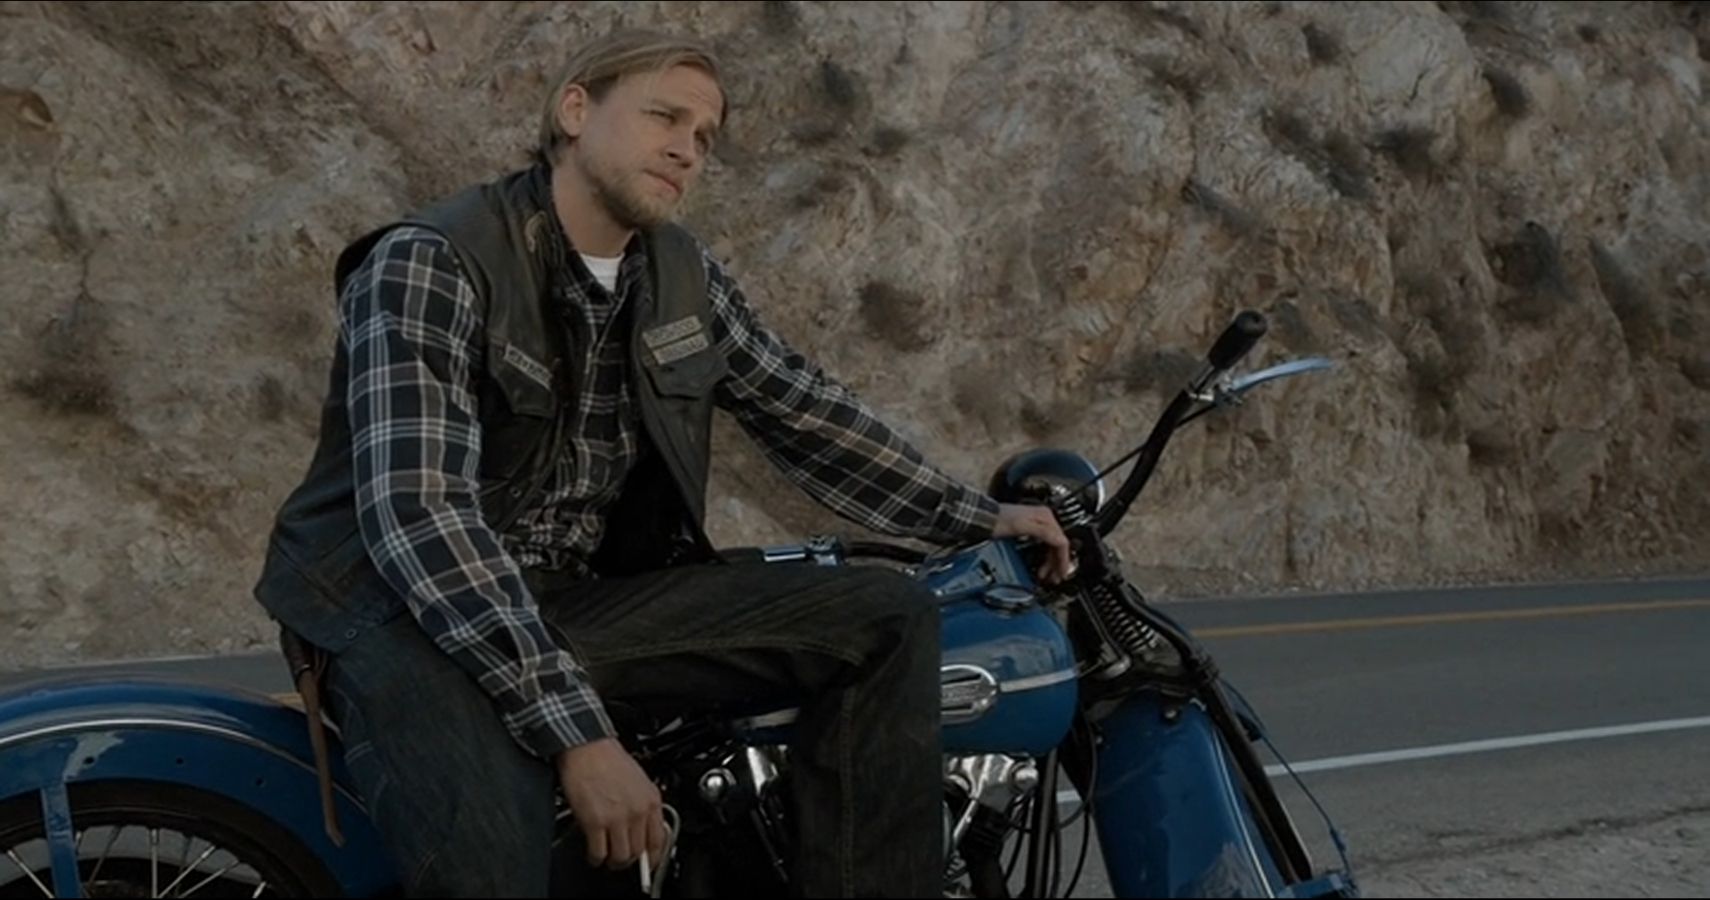 Will Tara Rat Out Jax? And 9 Other Questions for Sons of Anarchy